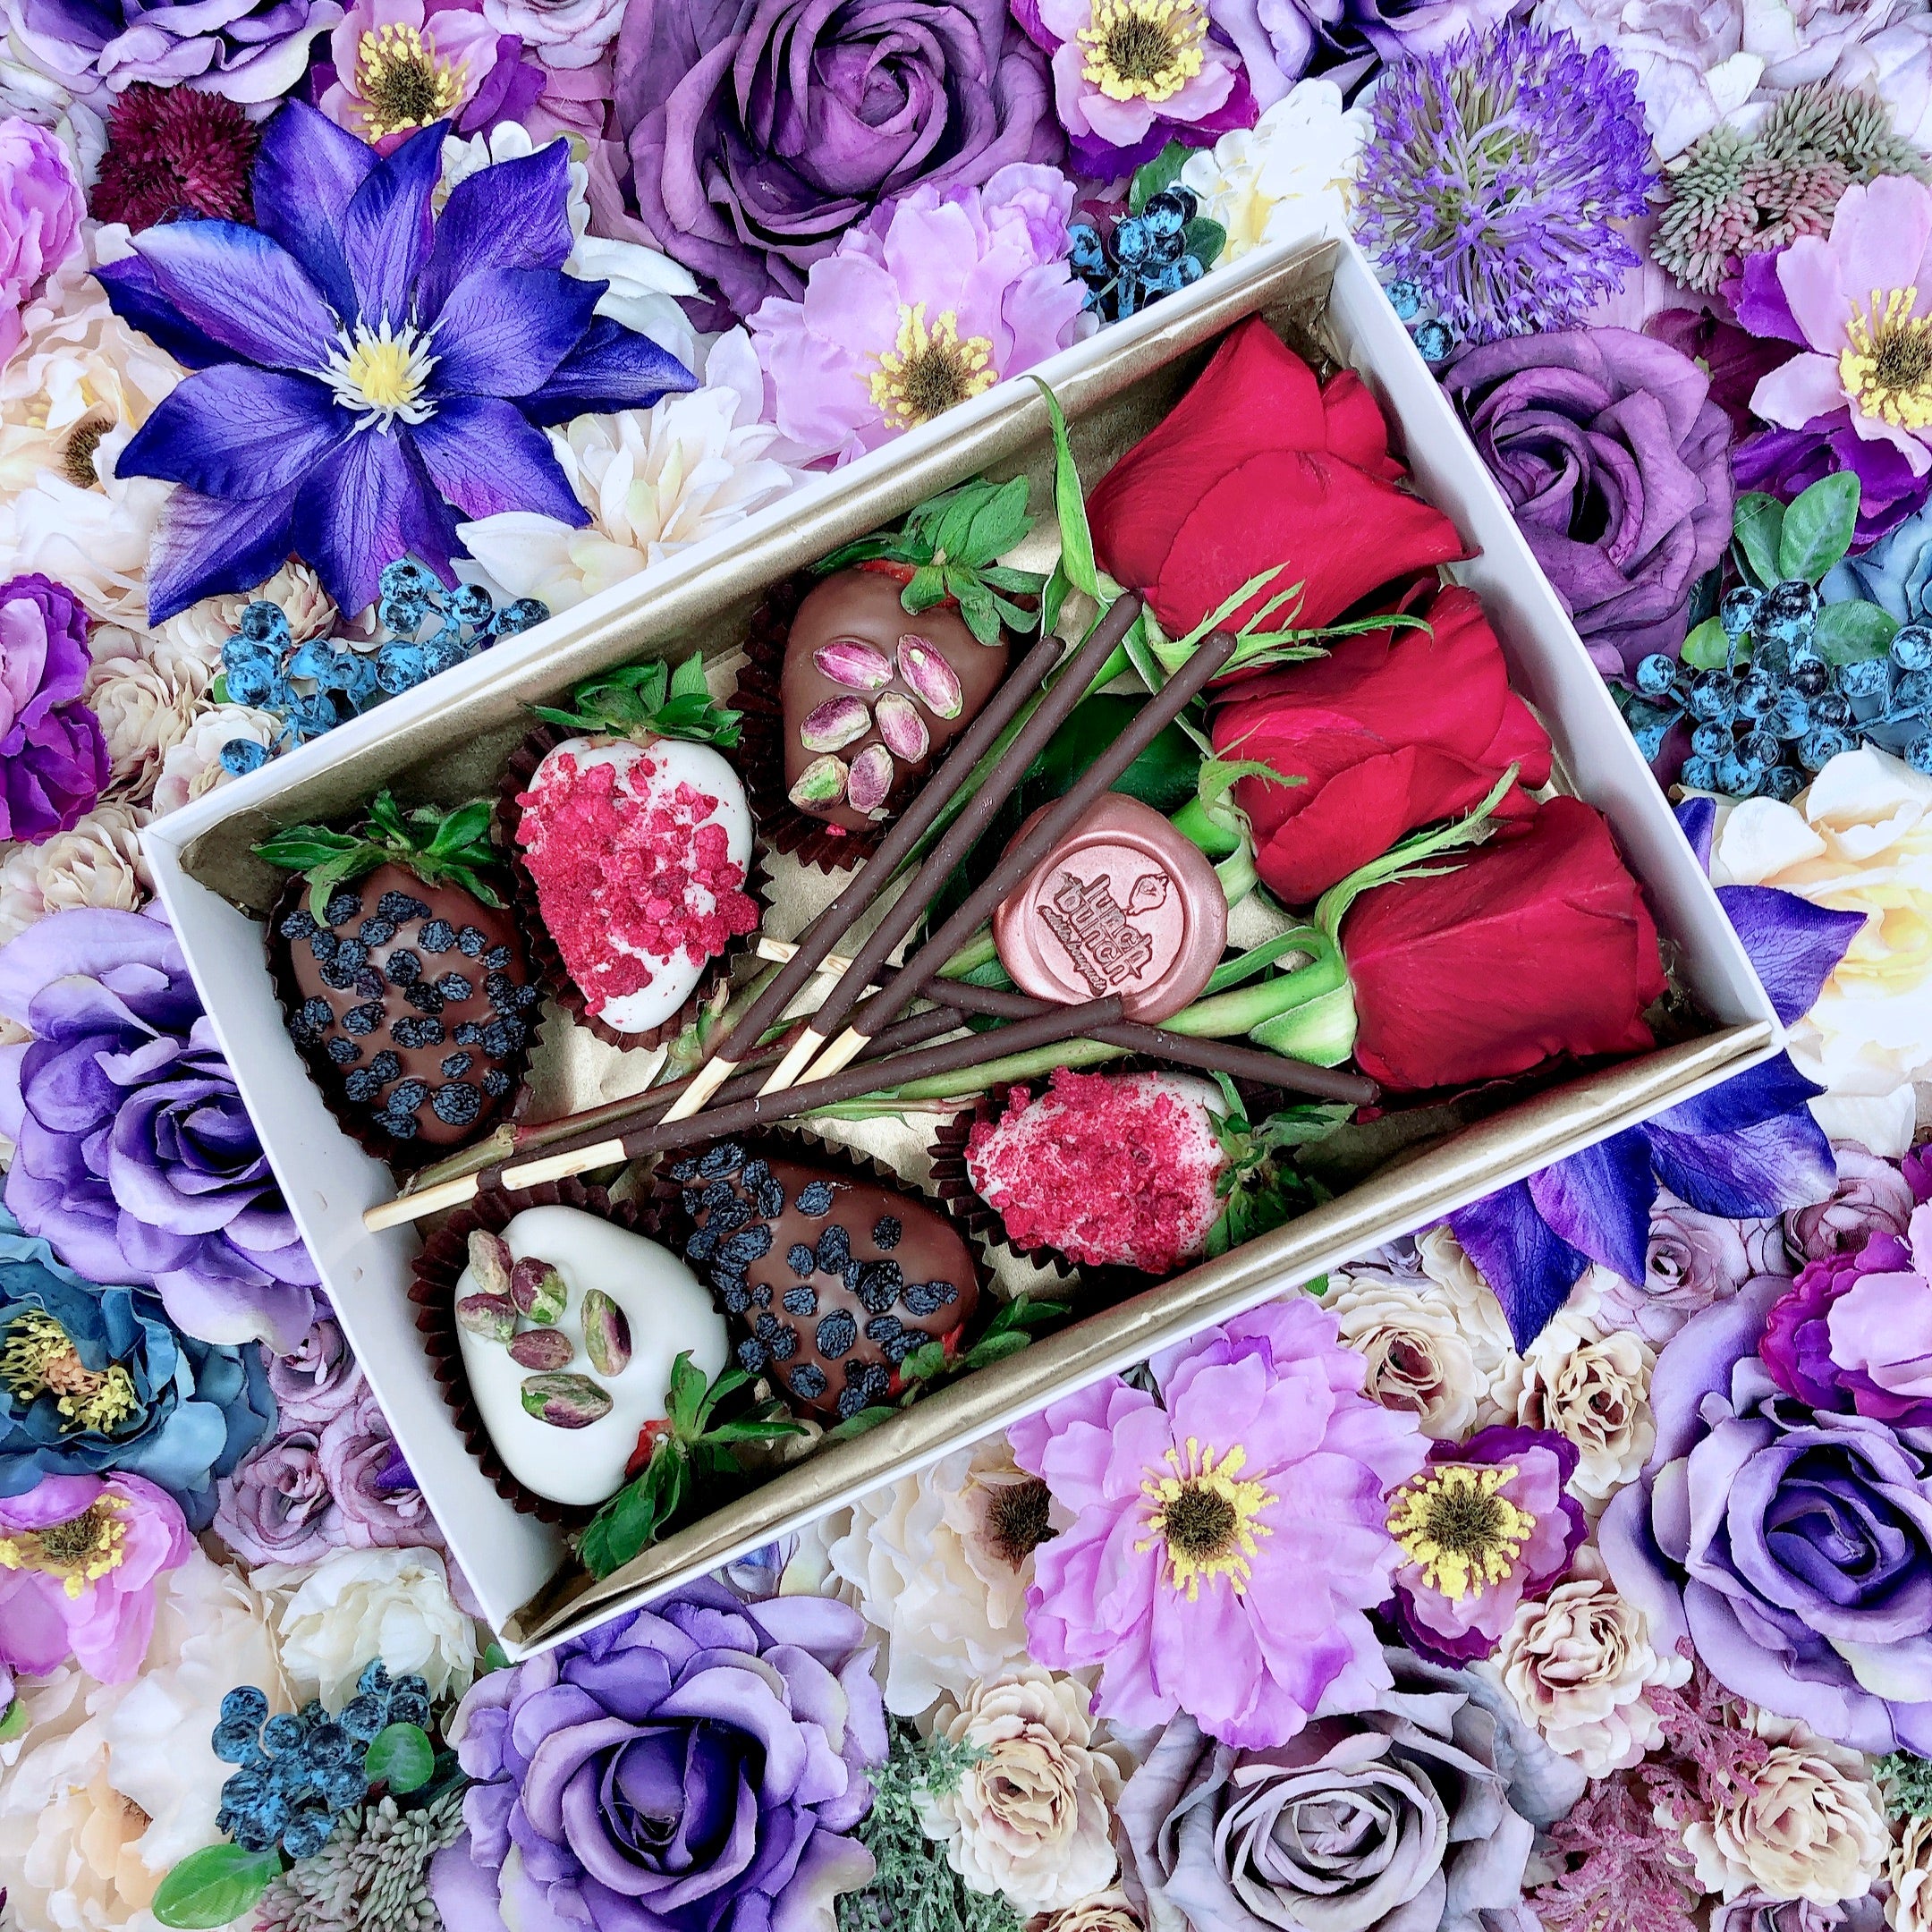 Chocolate decorated strawberries with flowers in a small dessert box